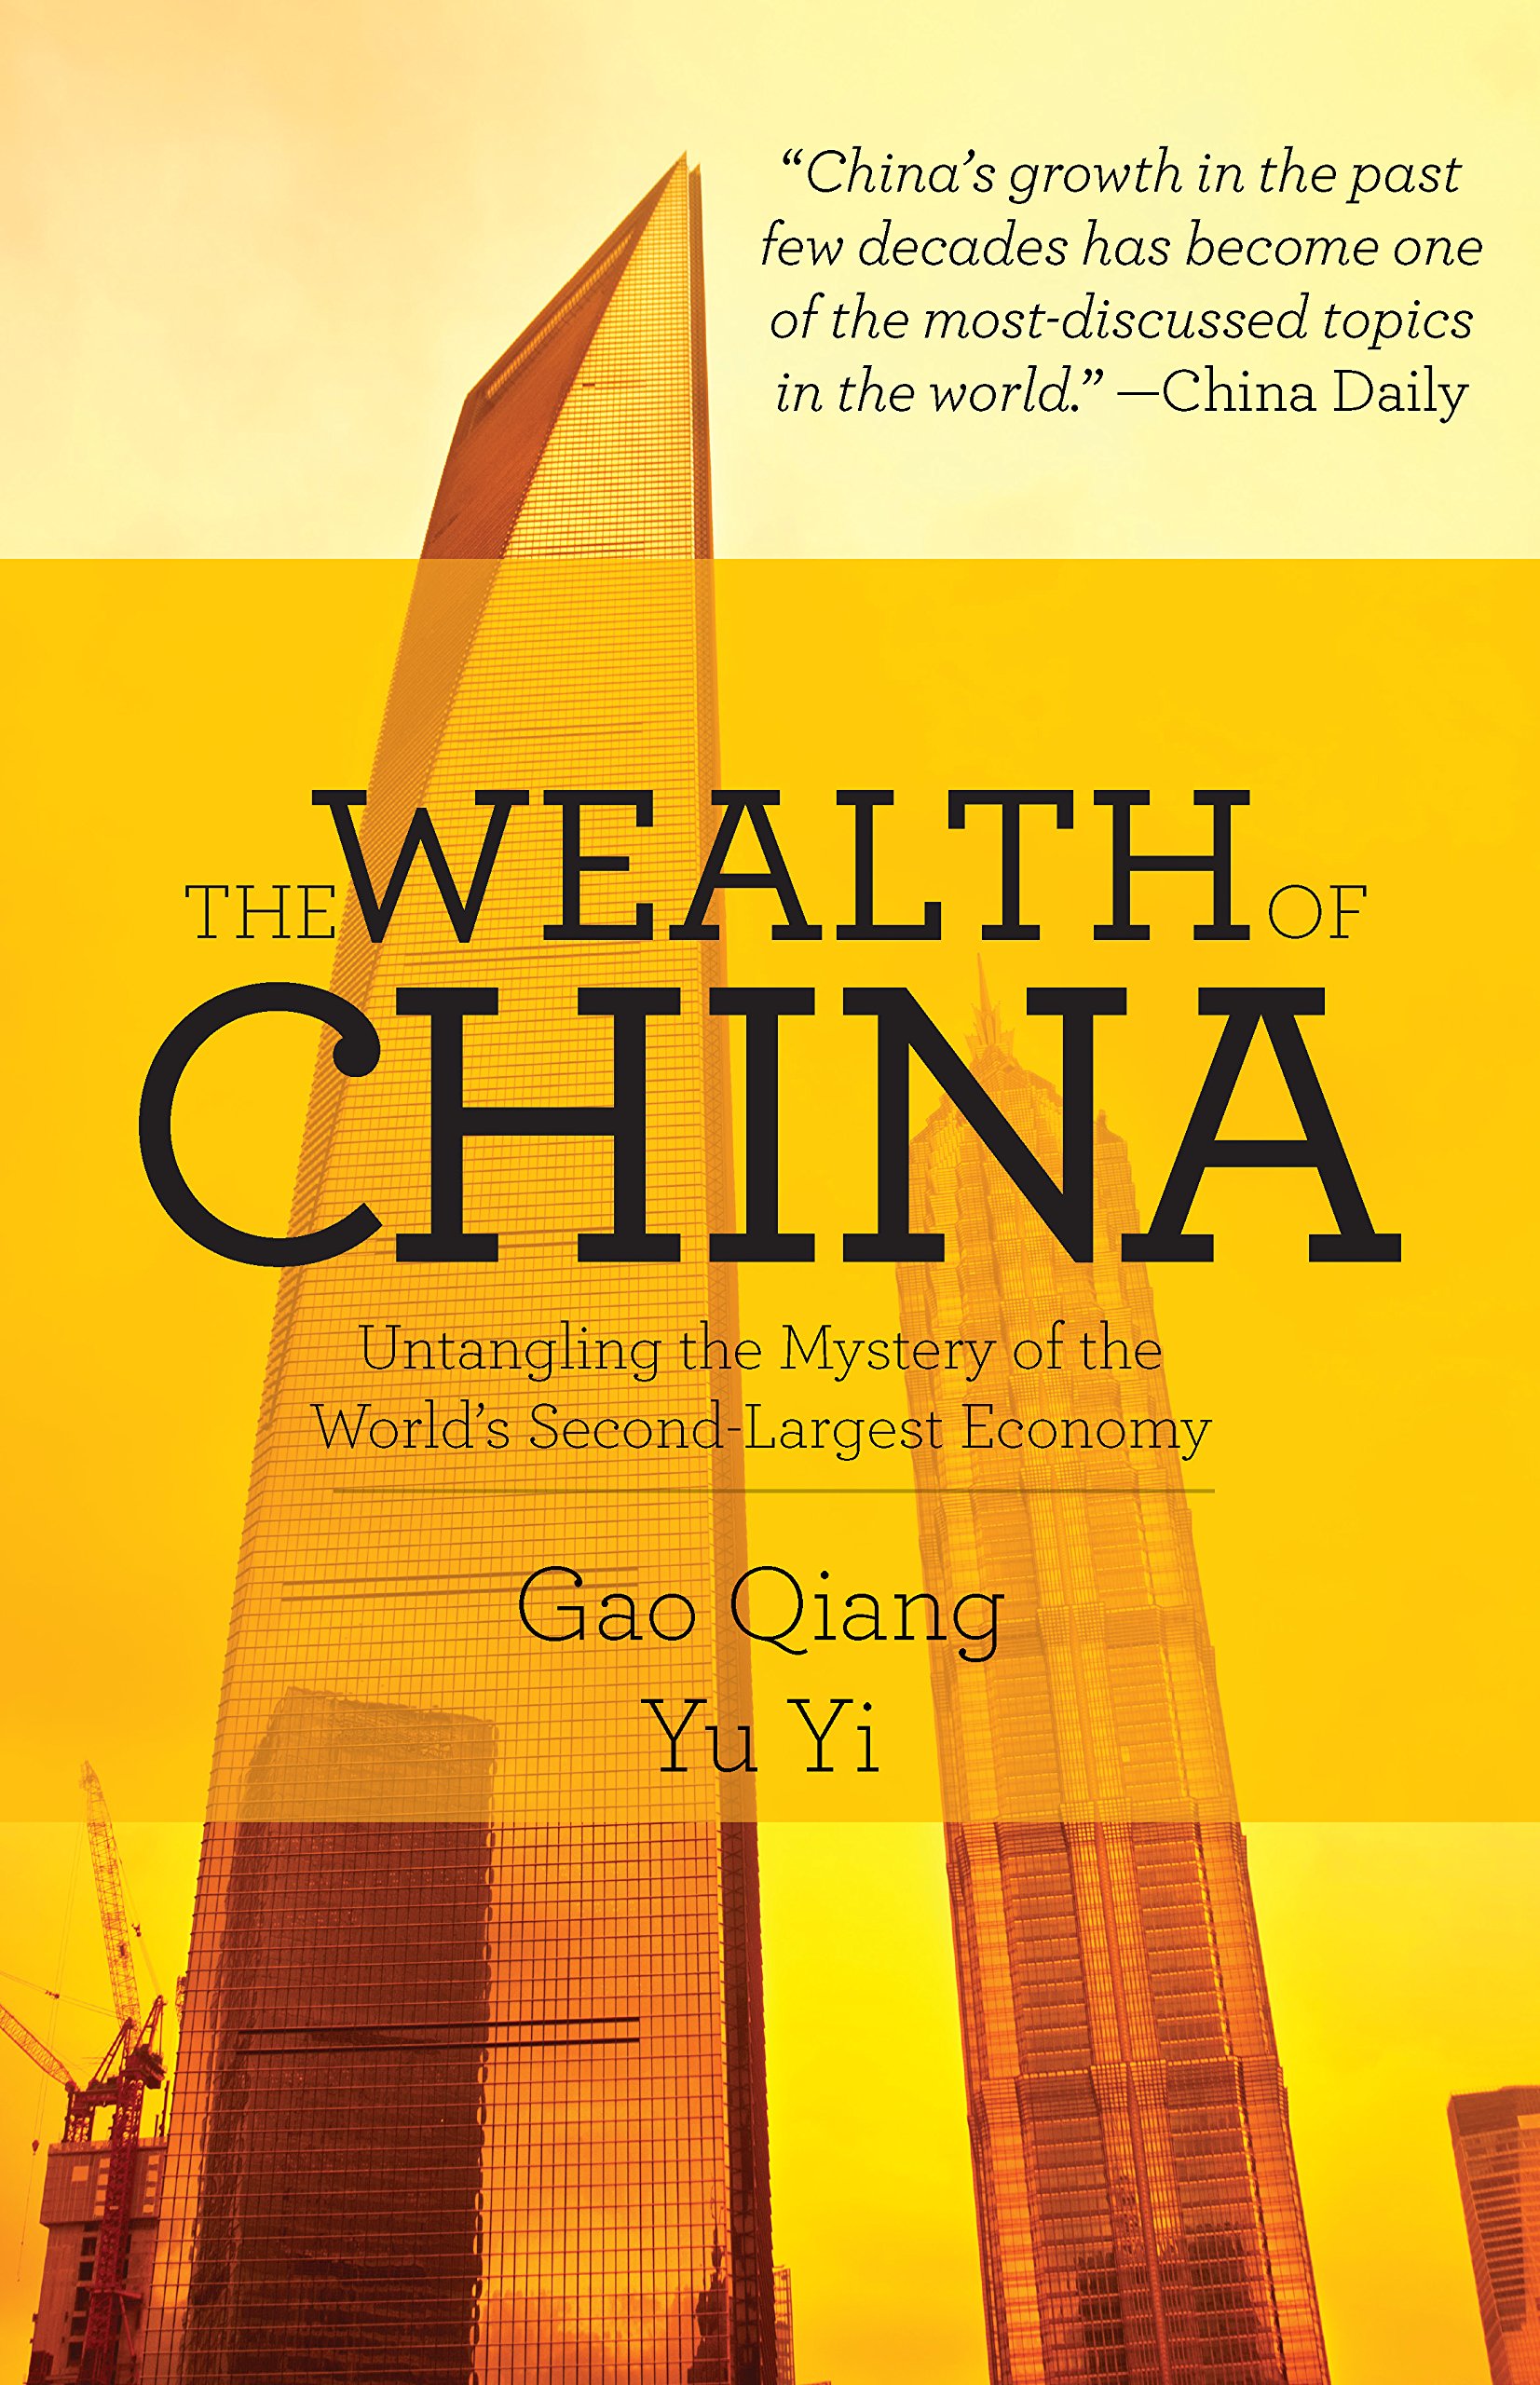 The wealth of China by Gao Qiang